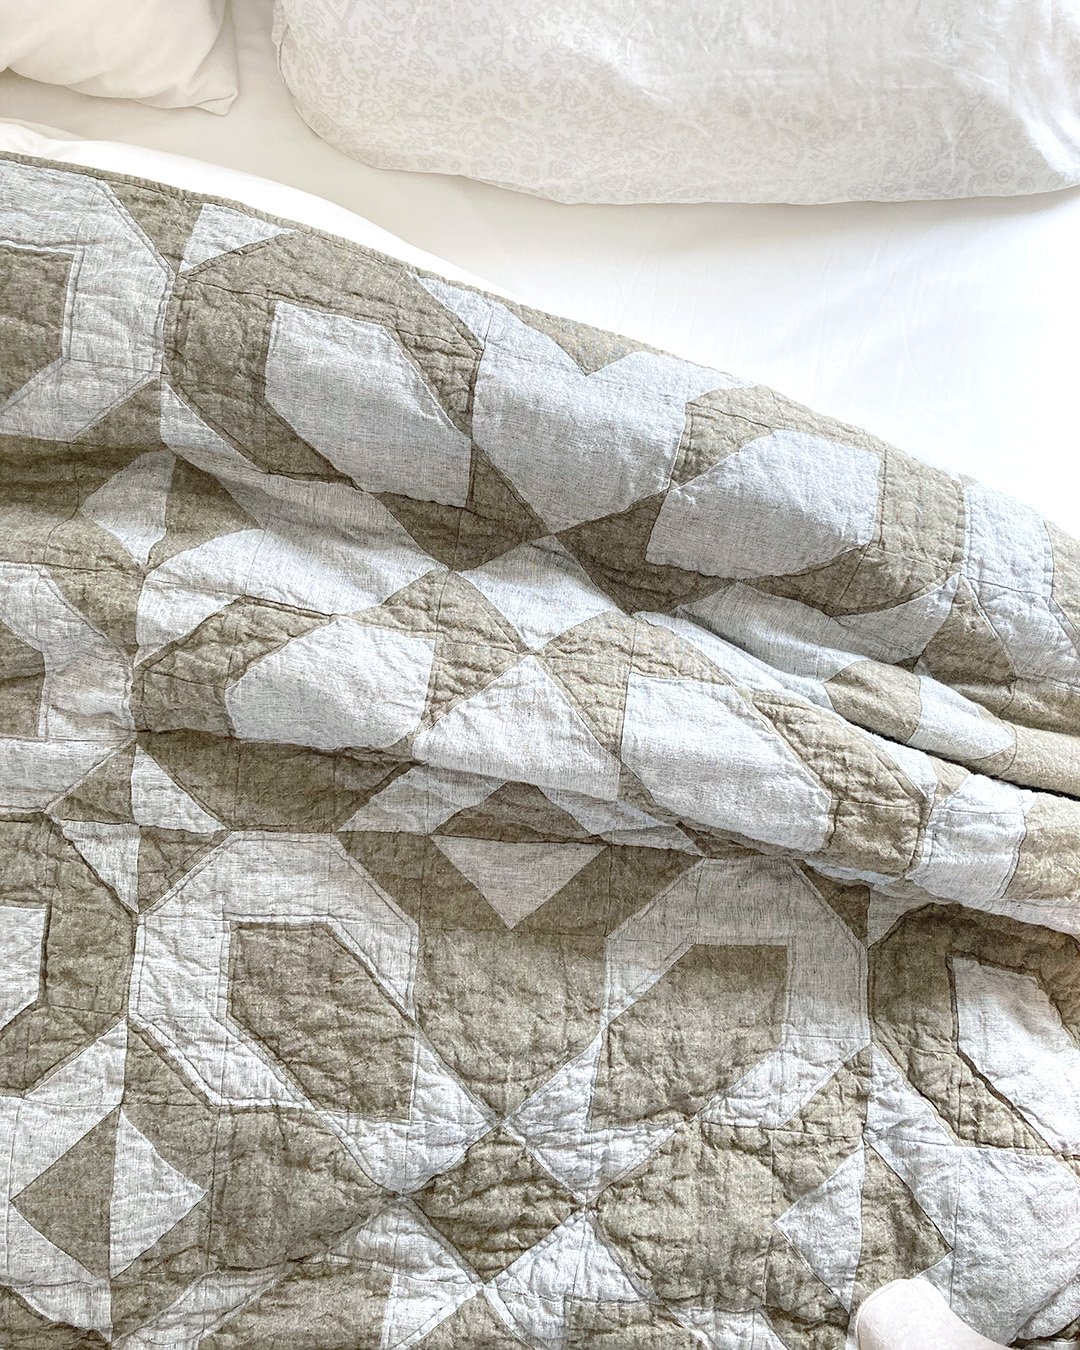 KD Spain — What I Learned About Sewing With Essex Linens